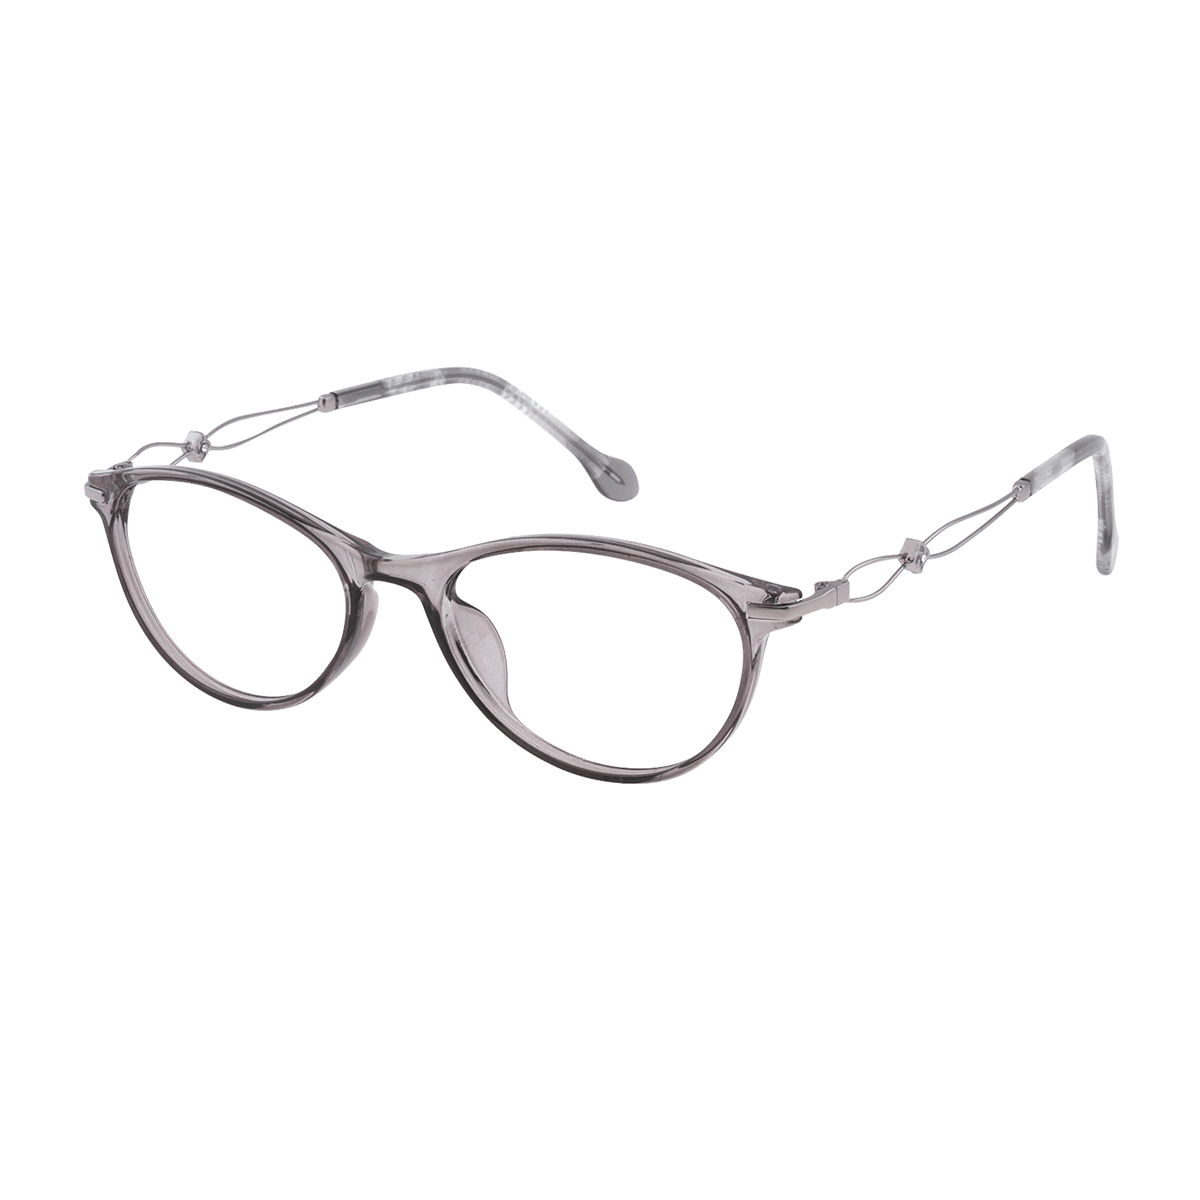 Aileen - Oval Transparent grey Reading Glasses for Women